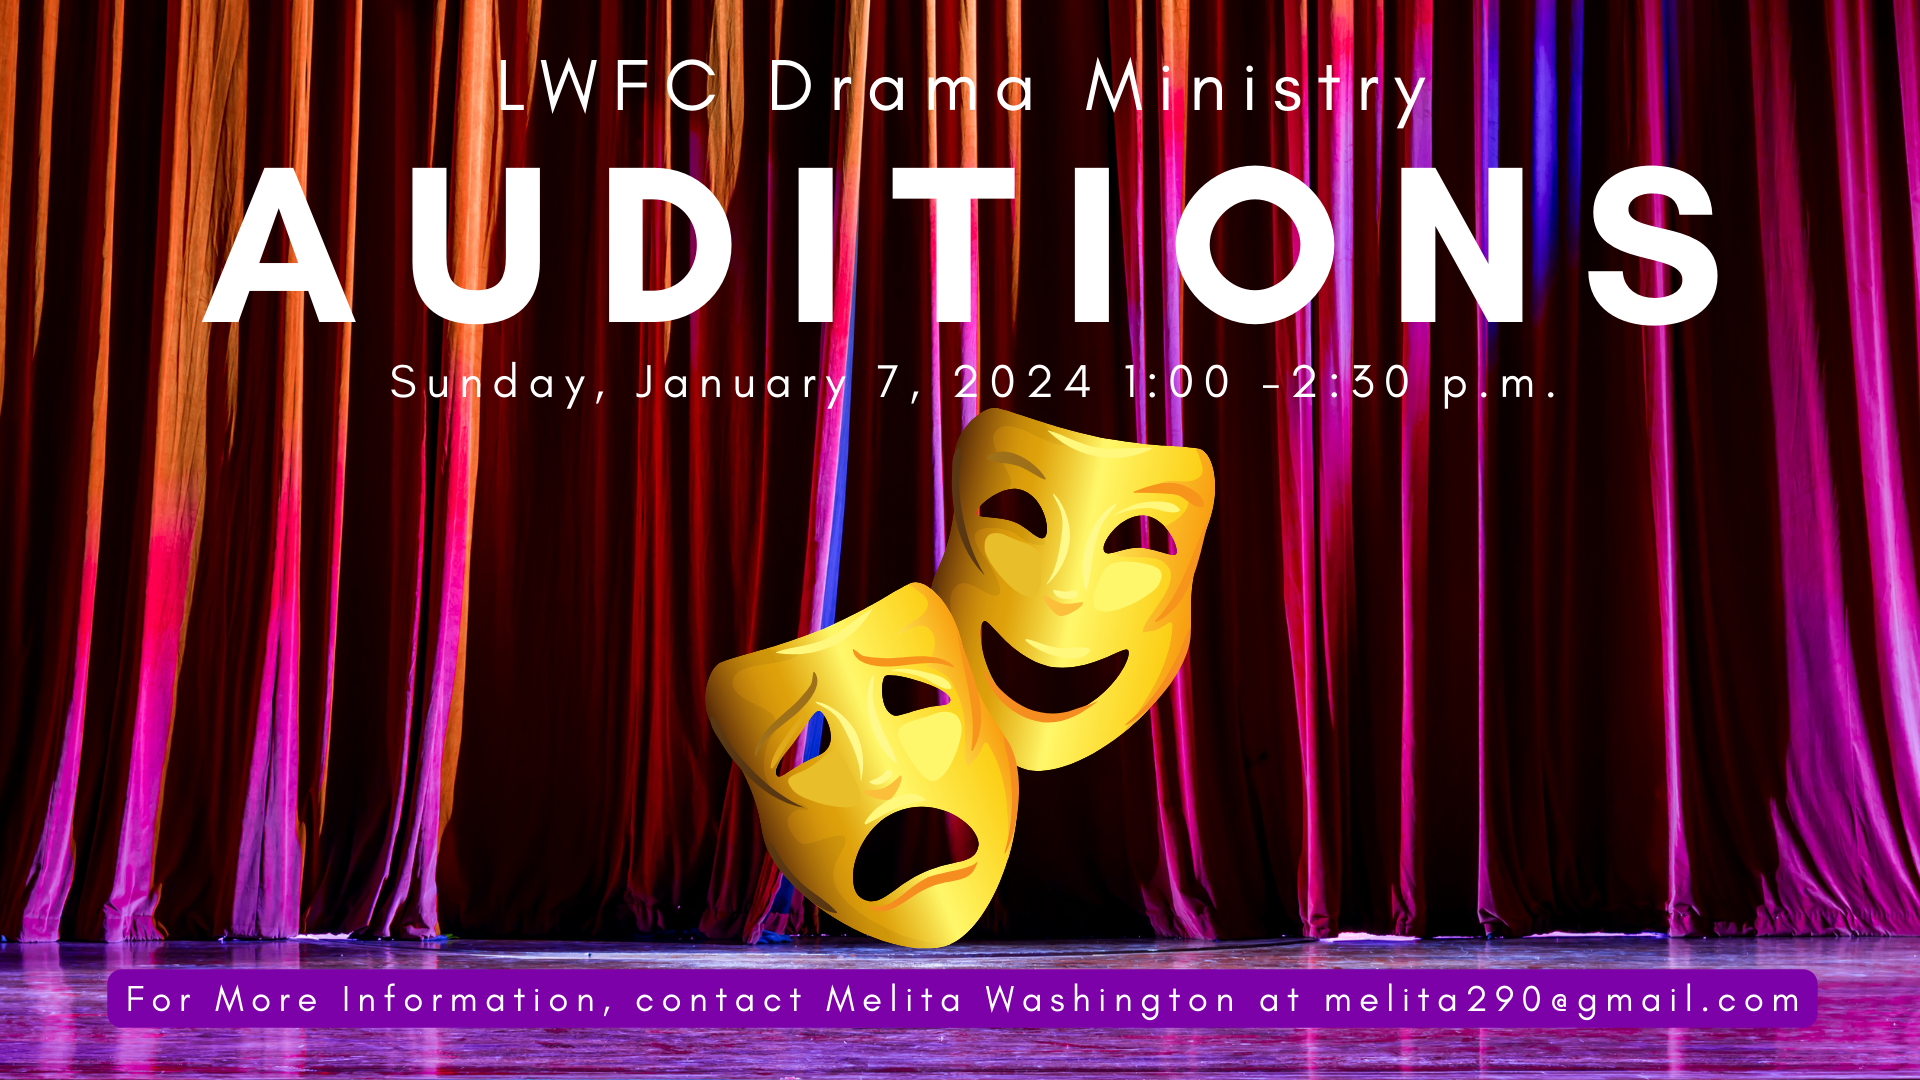 LWFC Drama Auditions for Good Friday head image